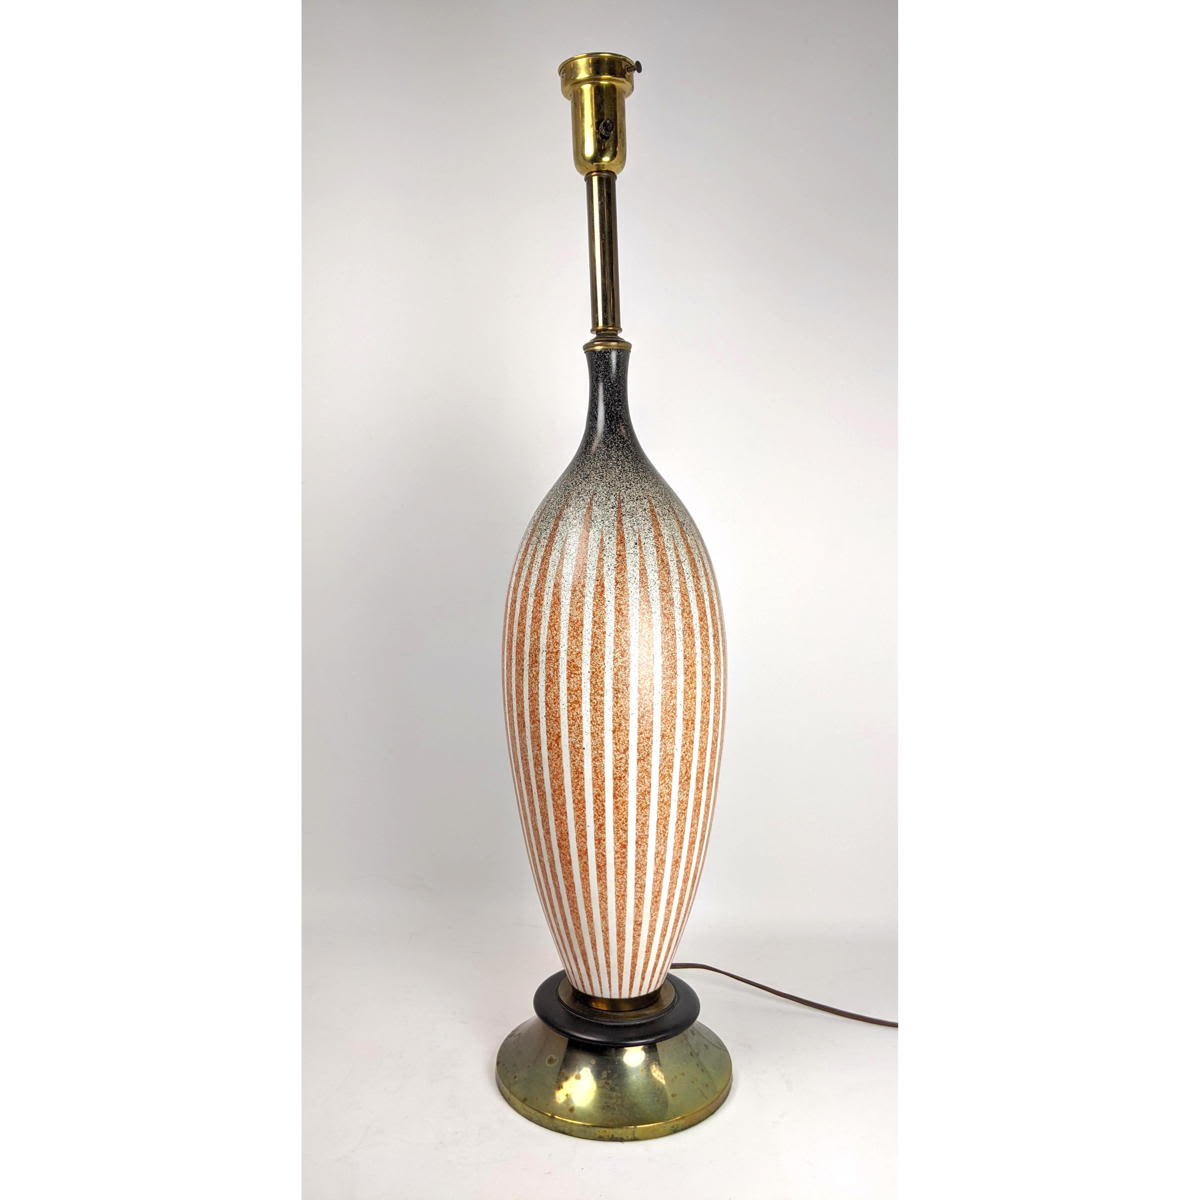 Tall Pottery Table Lamp. Black and rust